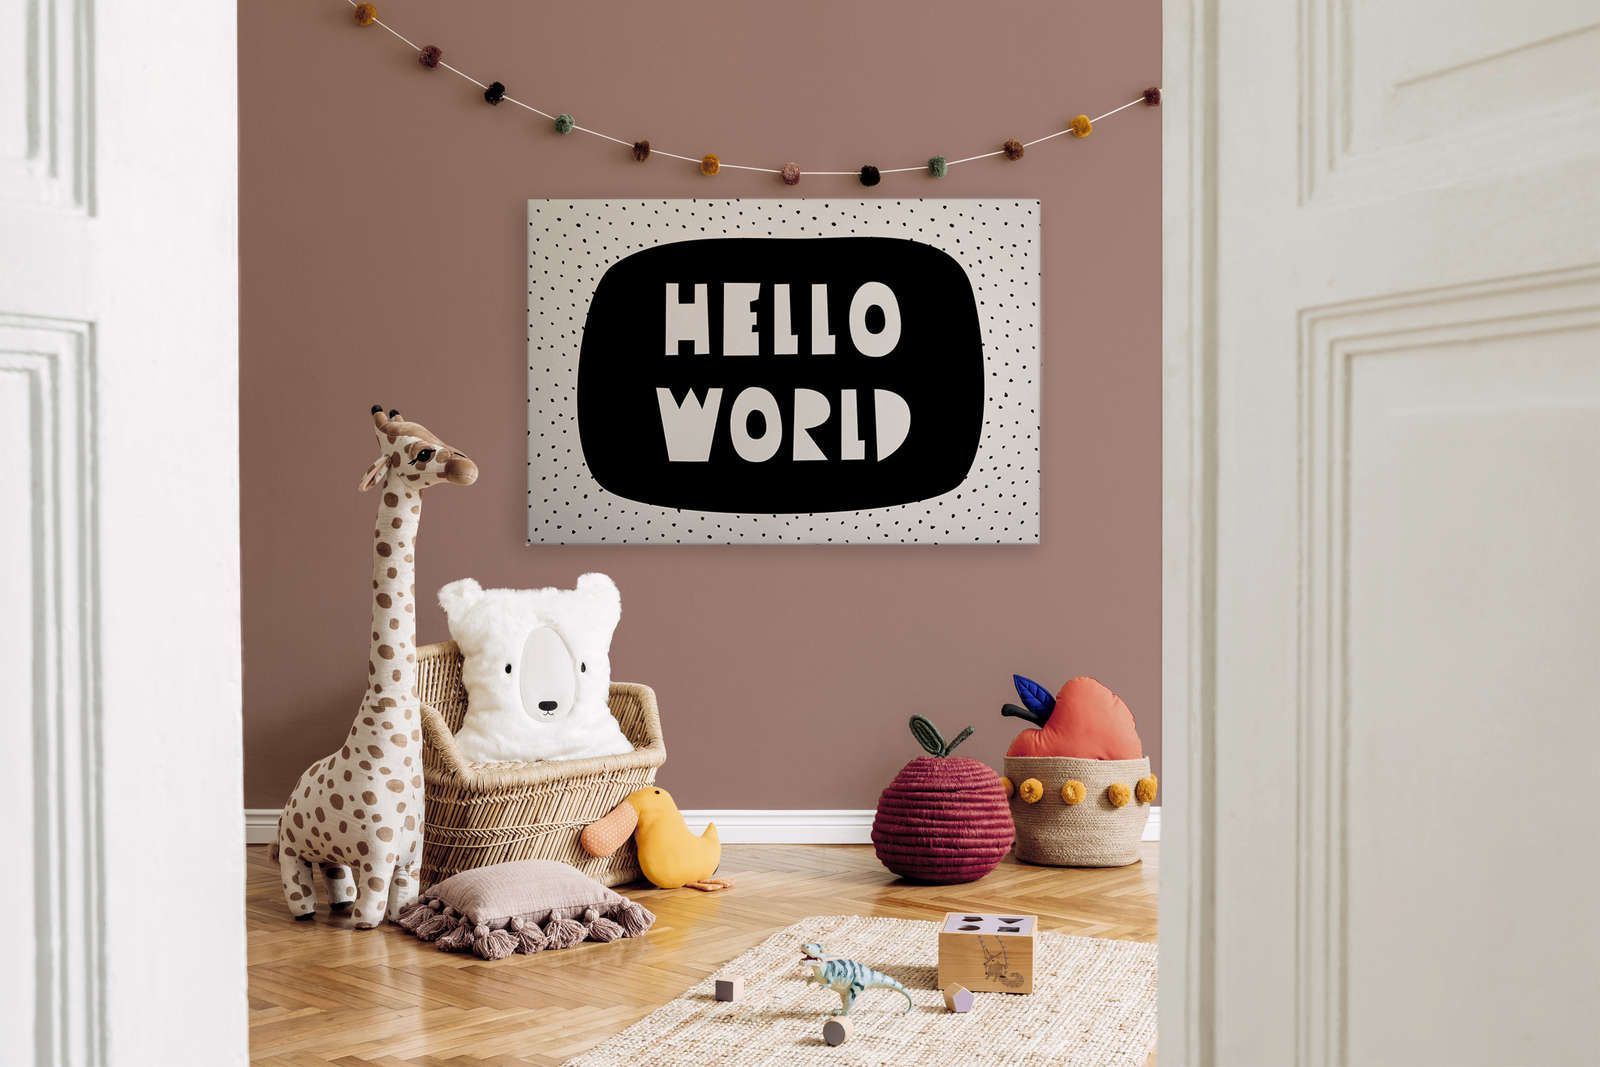             Canvas for children's room with lettering "Hello World" - 120 cm x 80 cm
        